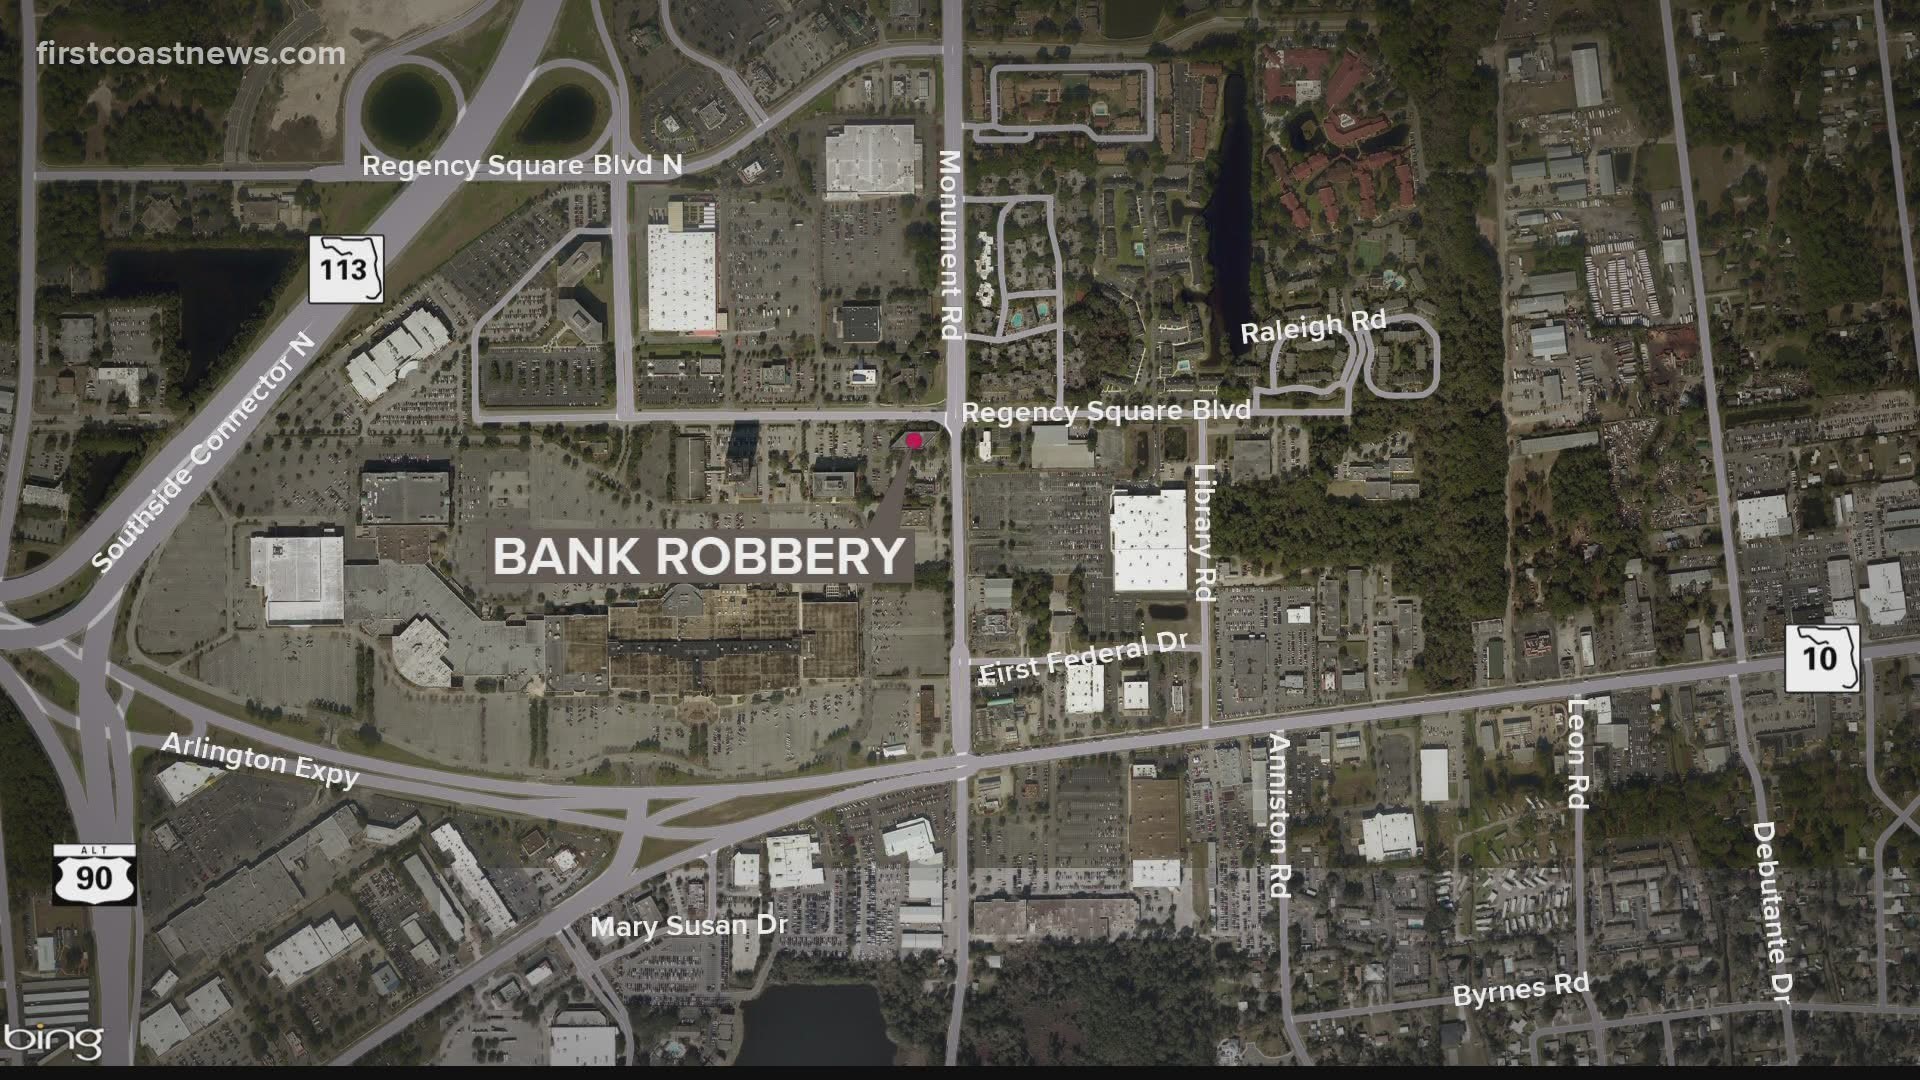 Person of interest in custody following third bank robbery in a week in Jacksonville